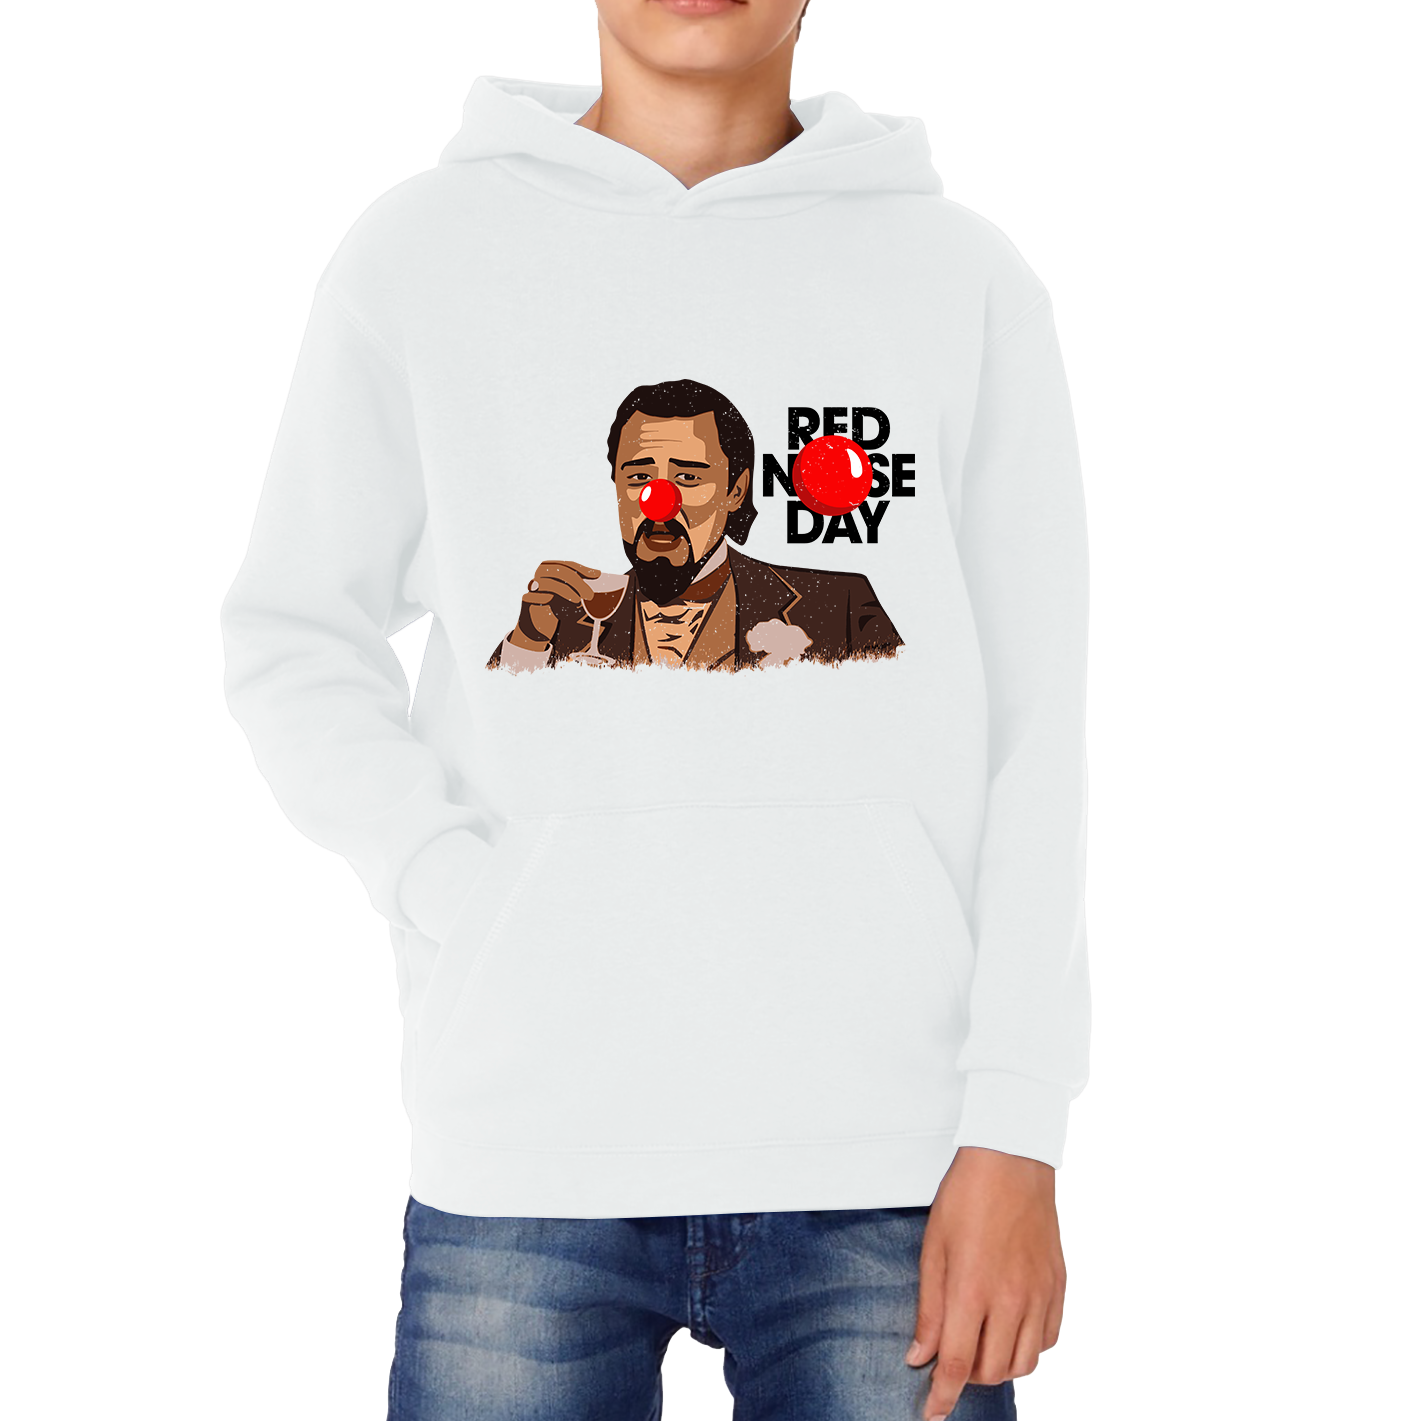 Leonardo Dicaprio Laughing Meme Red Nose Day Kids Hoodie. 50% Goes To Charity